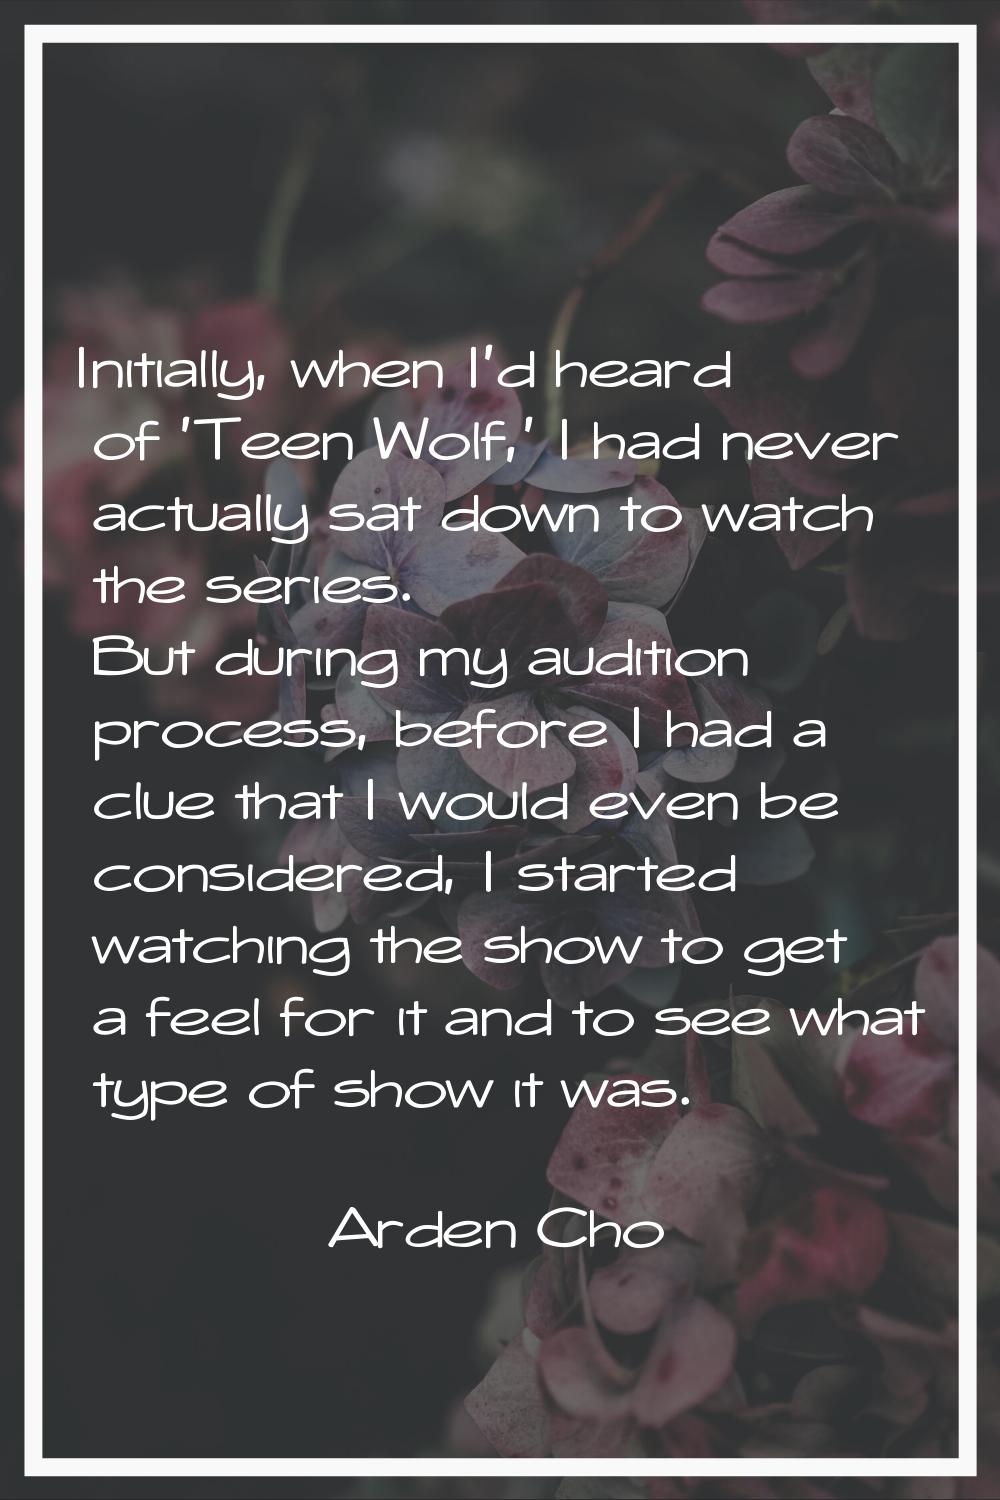 Initially, when I'd heard of 'Teen Wolf,' I had never actually sat down to watch the series. But du